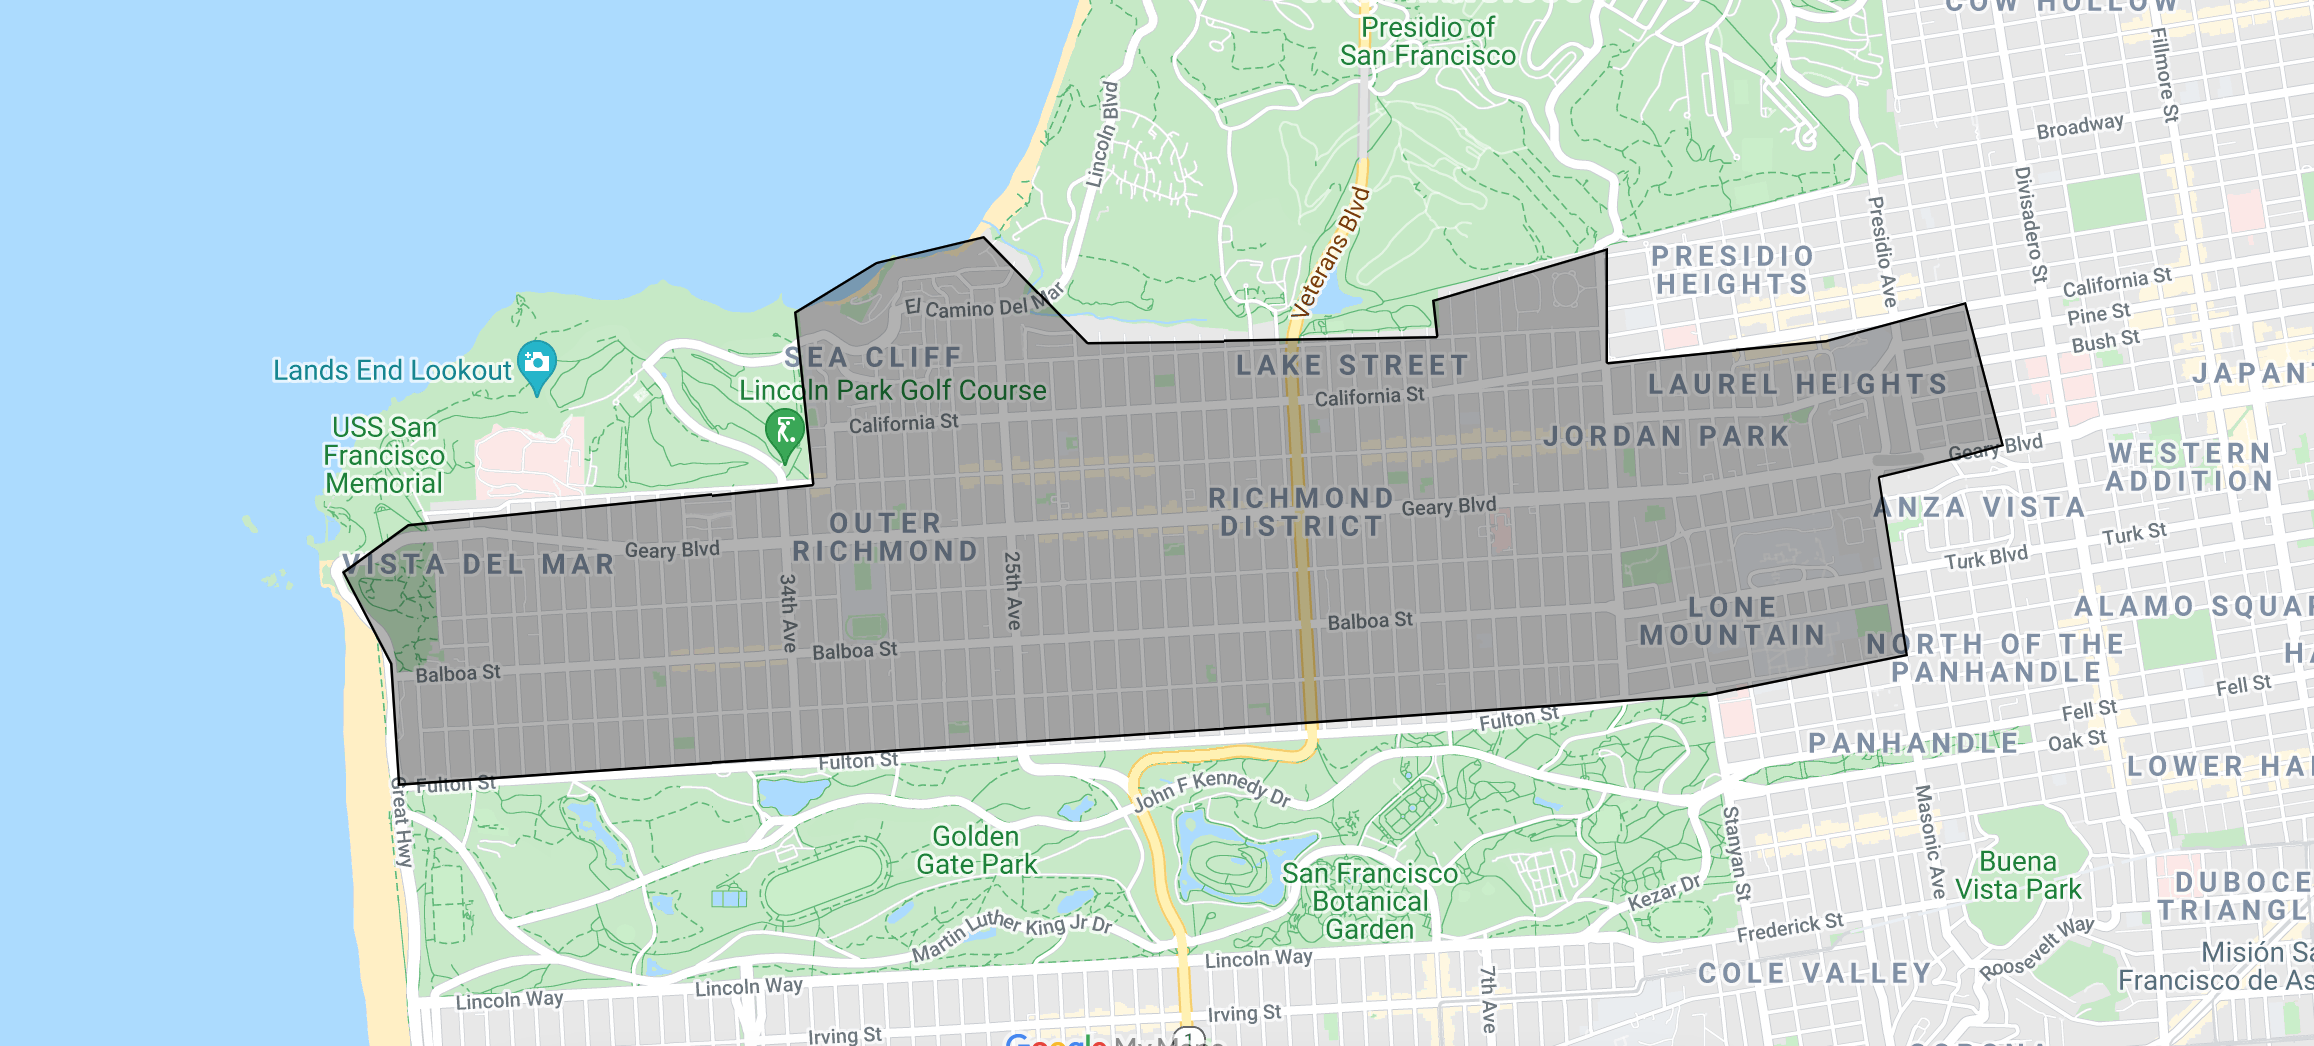 map of district 1 of sf